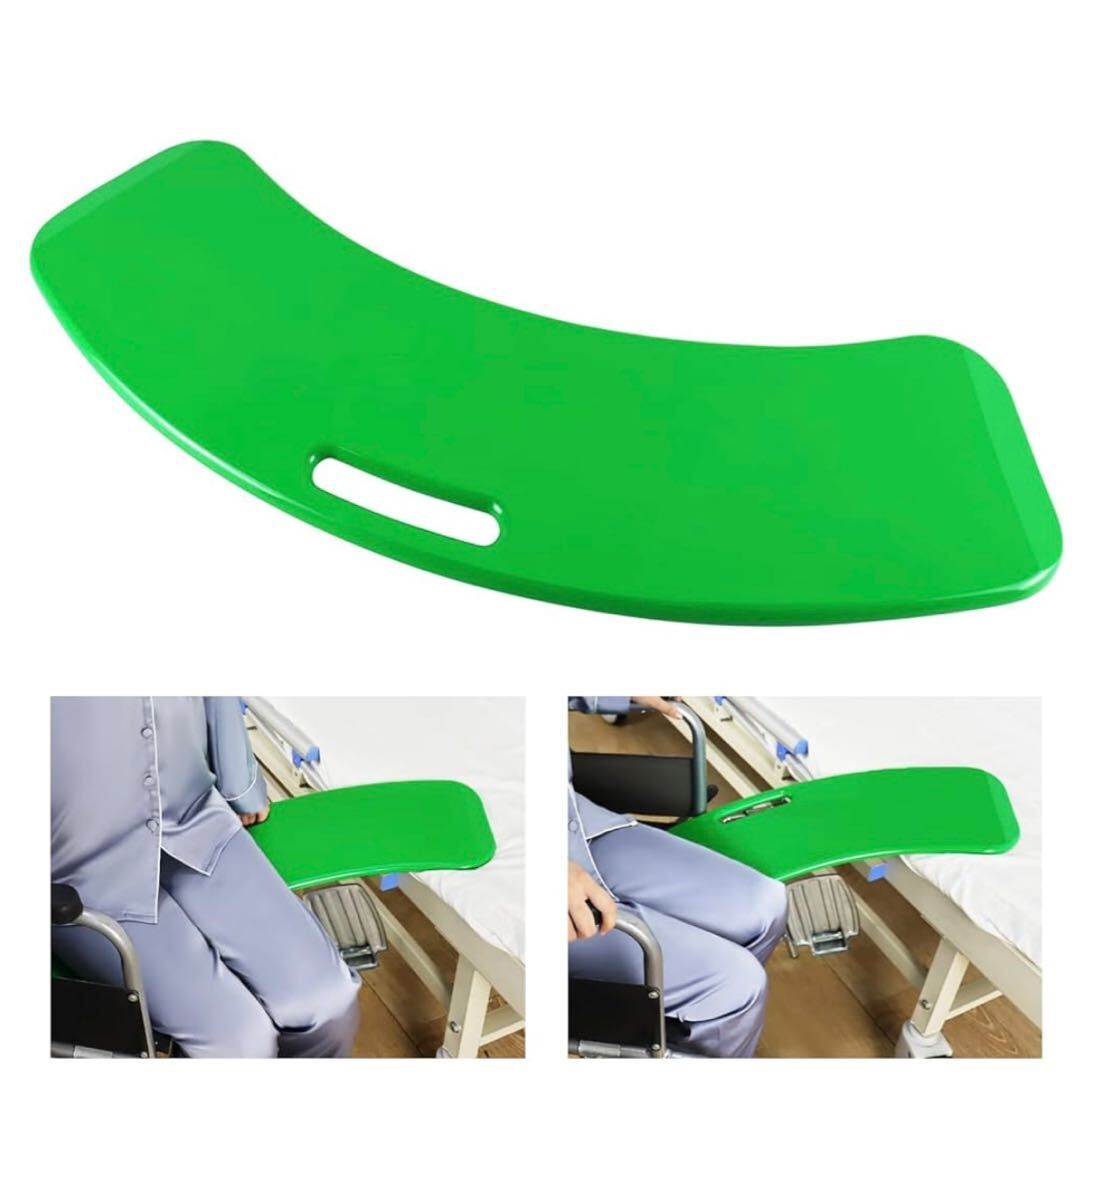  nursing articles LOSCHEN. passenger use board seniours sliding type auxiliary tool wheelchair from bed movement assistance green 